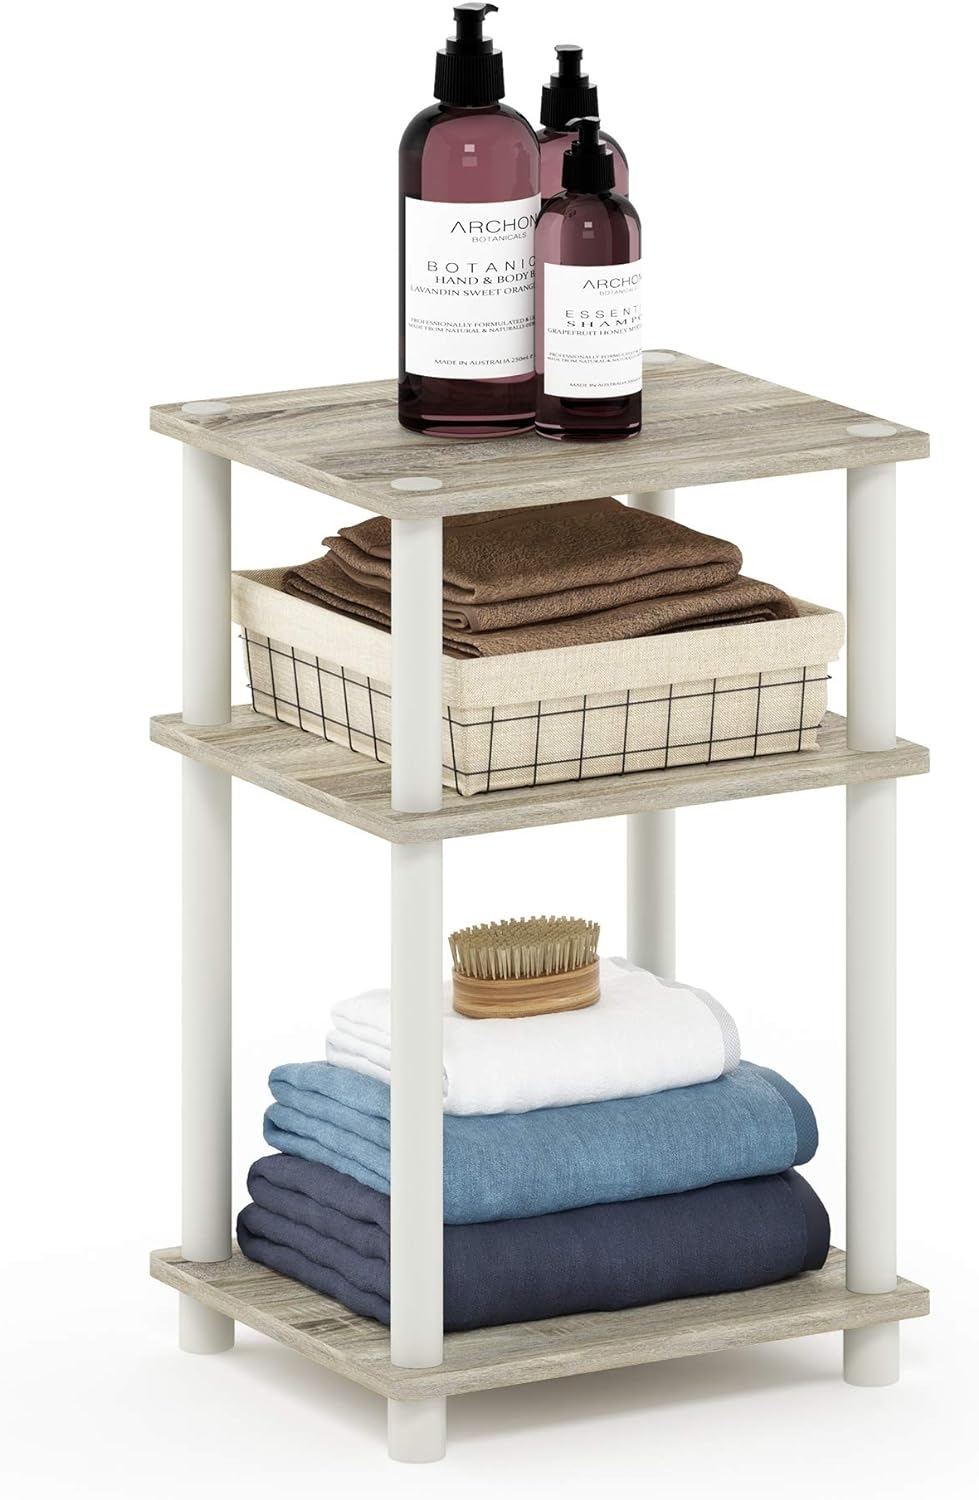 three tier shelf with towels on shelves